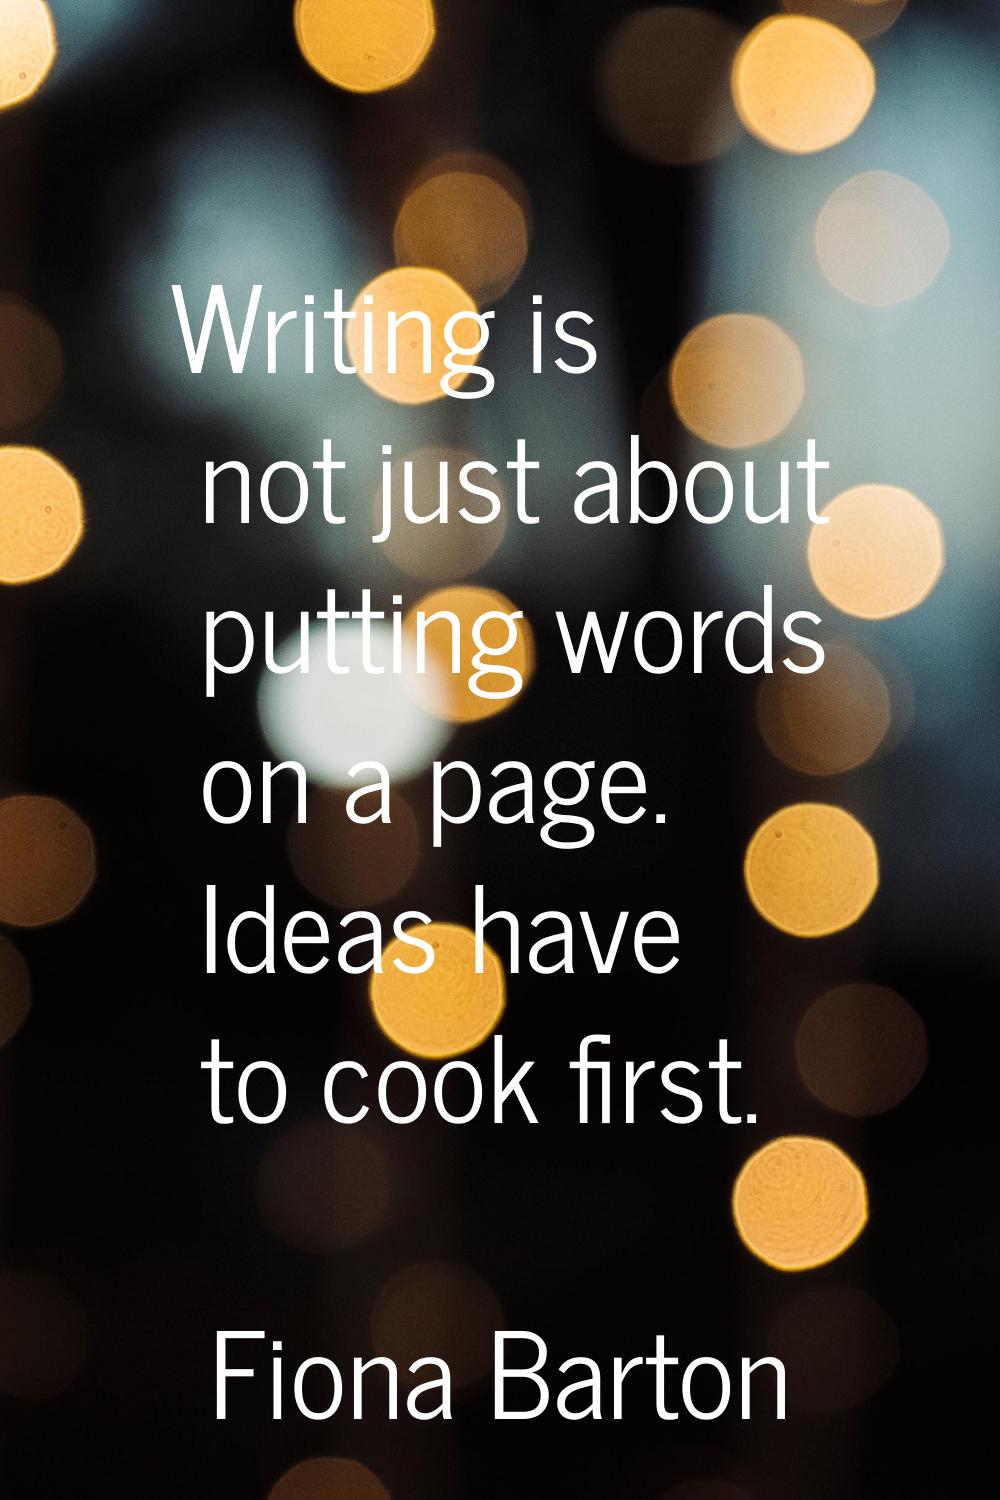 Writing is not just about putting words on a page. Ideas have to cook first.